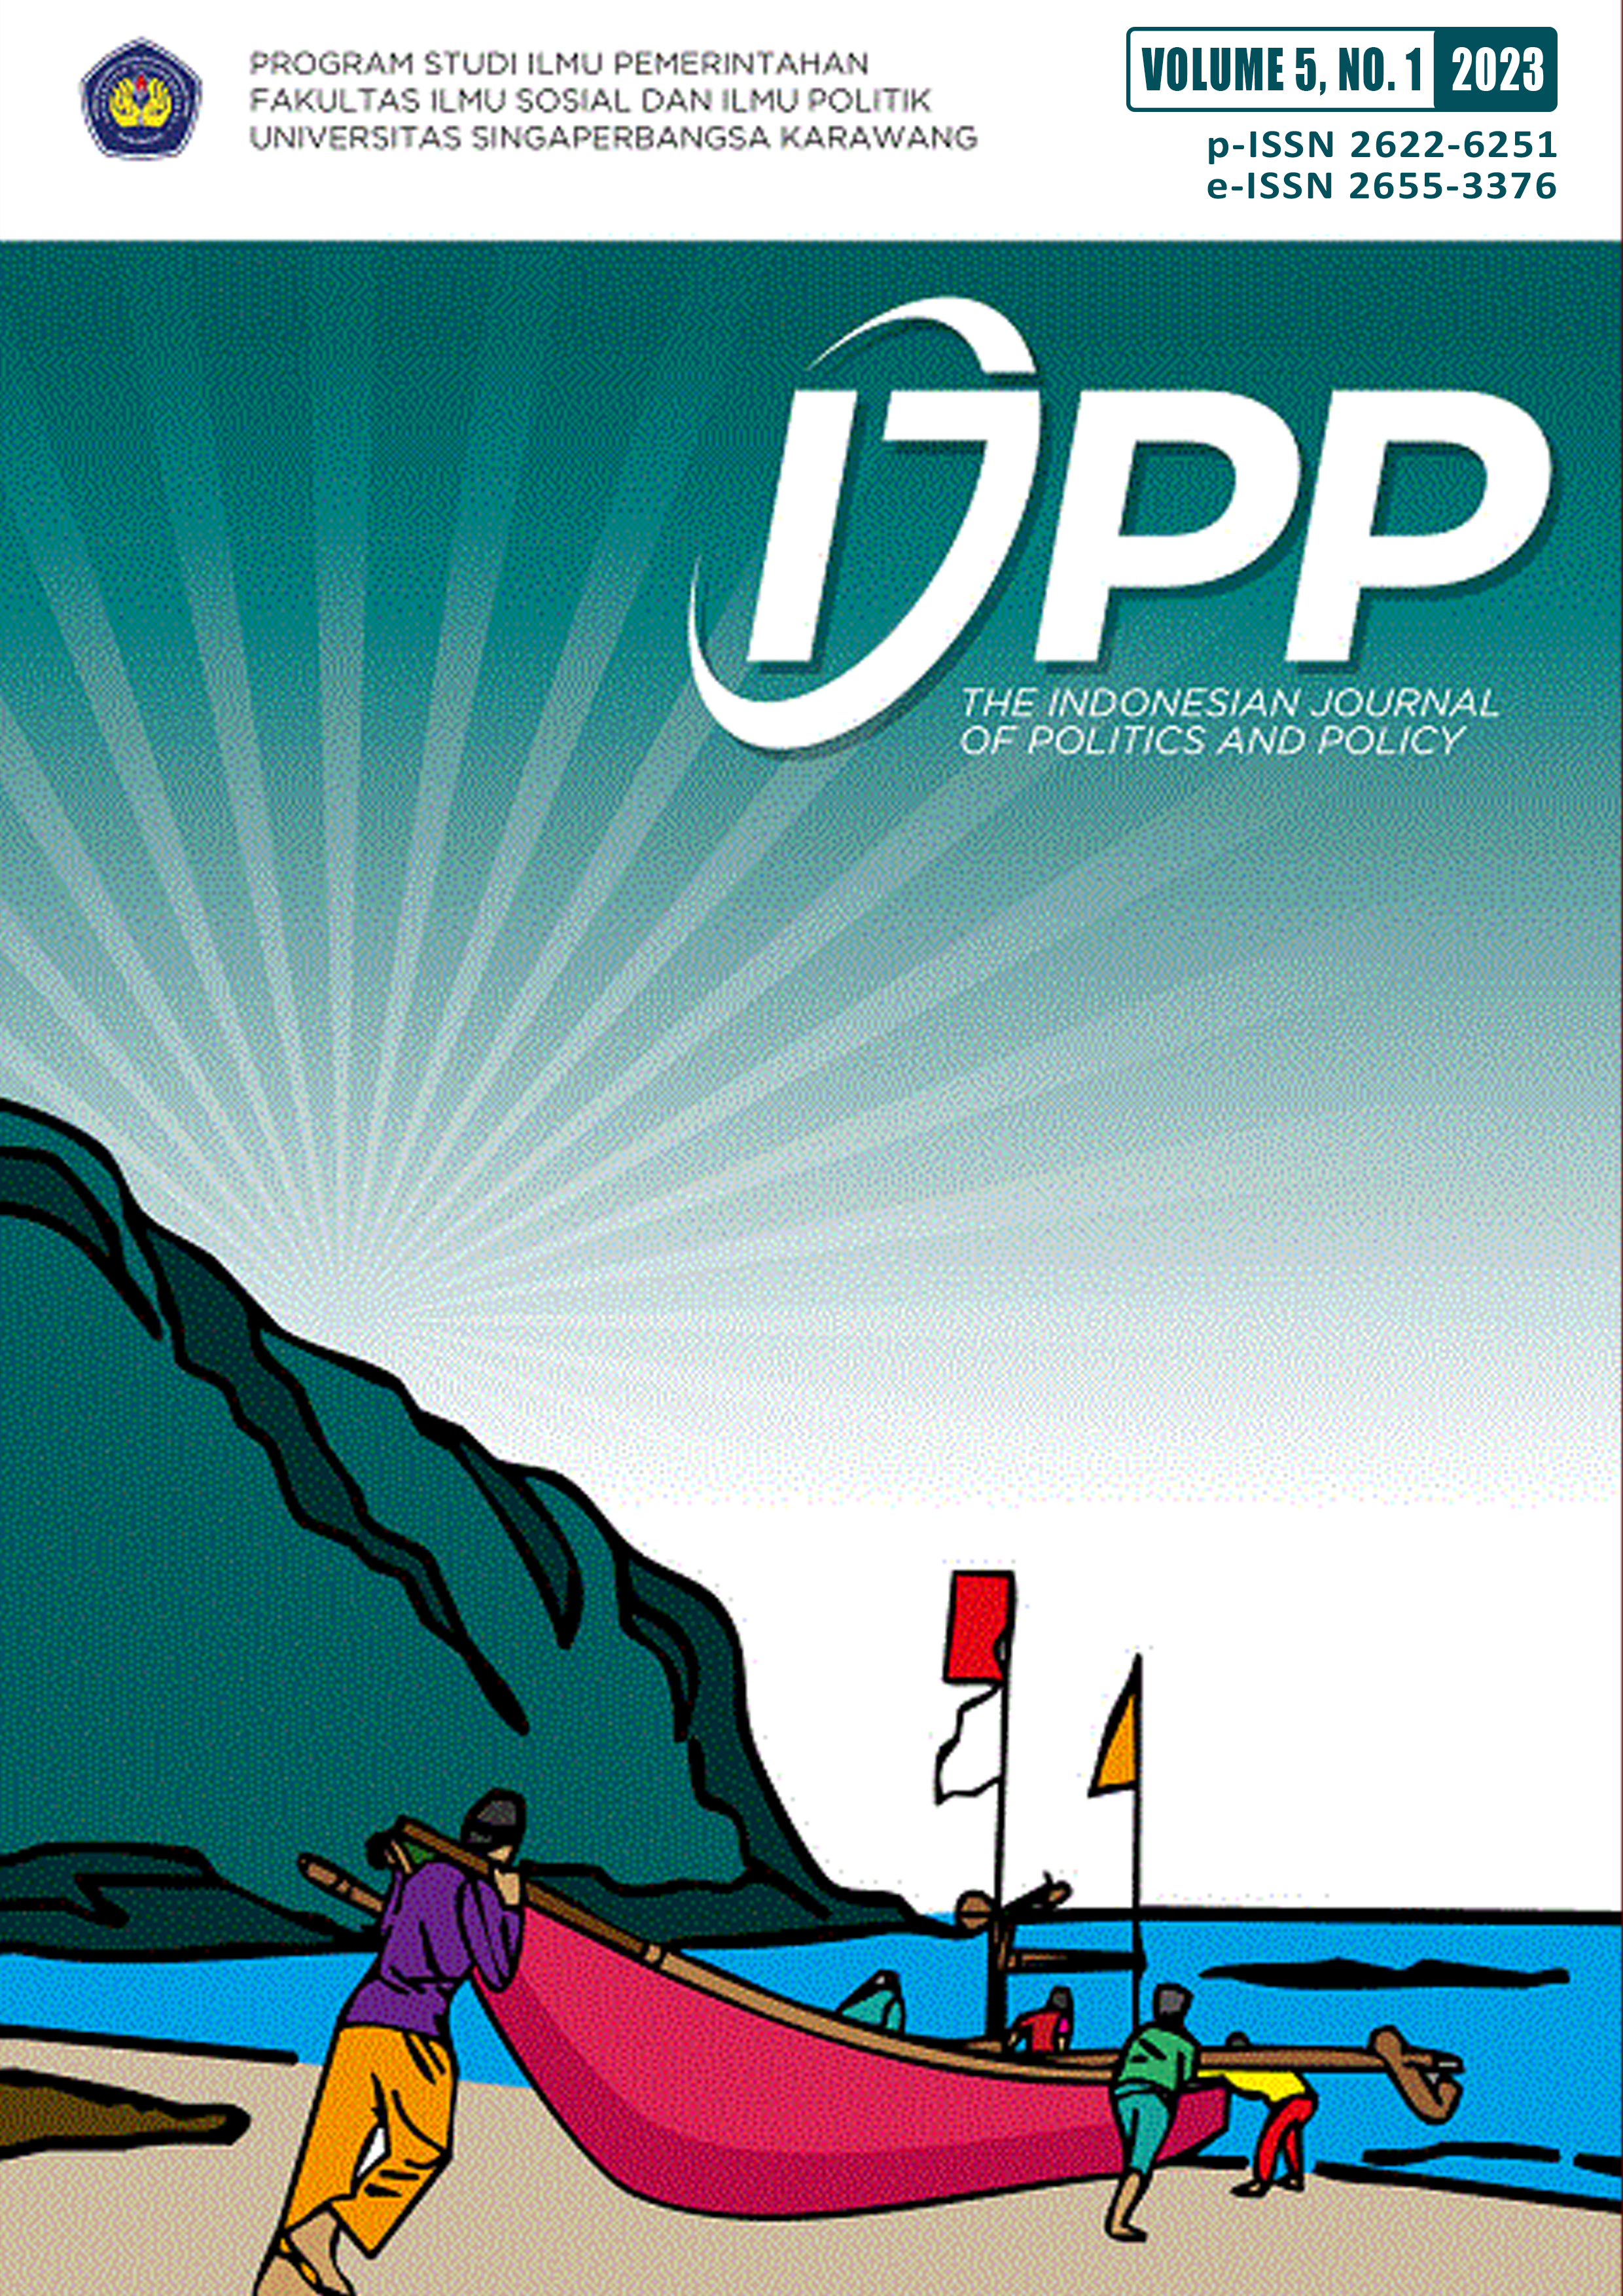 					Lihat Vol 5 No 1 (2023): THE INDONESIAN JOURNAL OF POLITICS AND POLICY
				